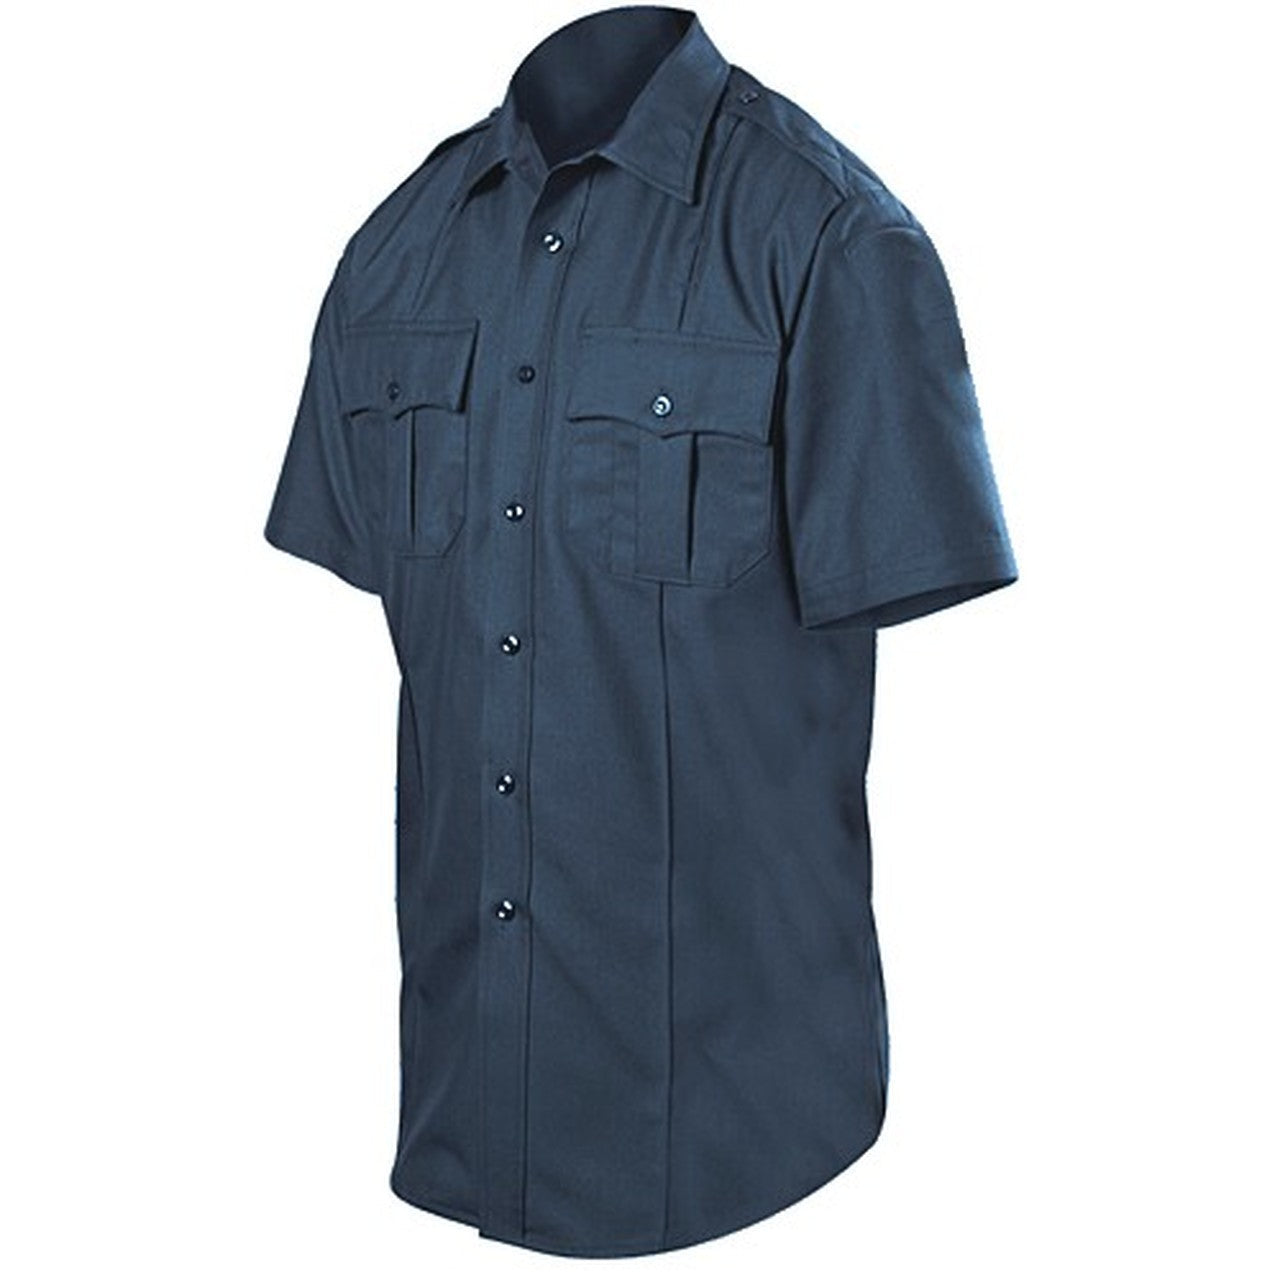 the Firemen Police Public Safety | Wool Blend Short Sleeve Navy Uniform Collared Shirt | Class Act Polywool Dark Blue Button Down Duty Shirt has extra length and looks professional